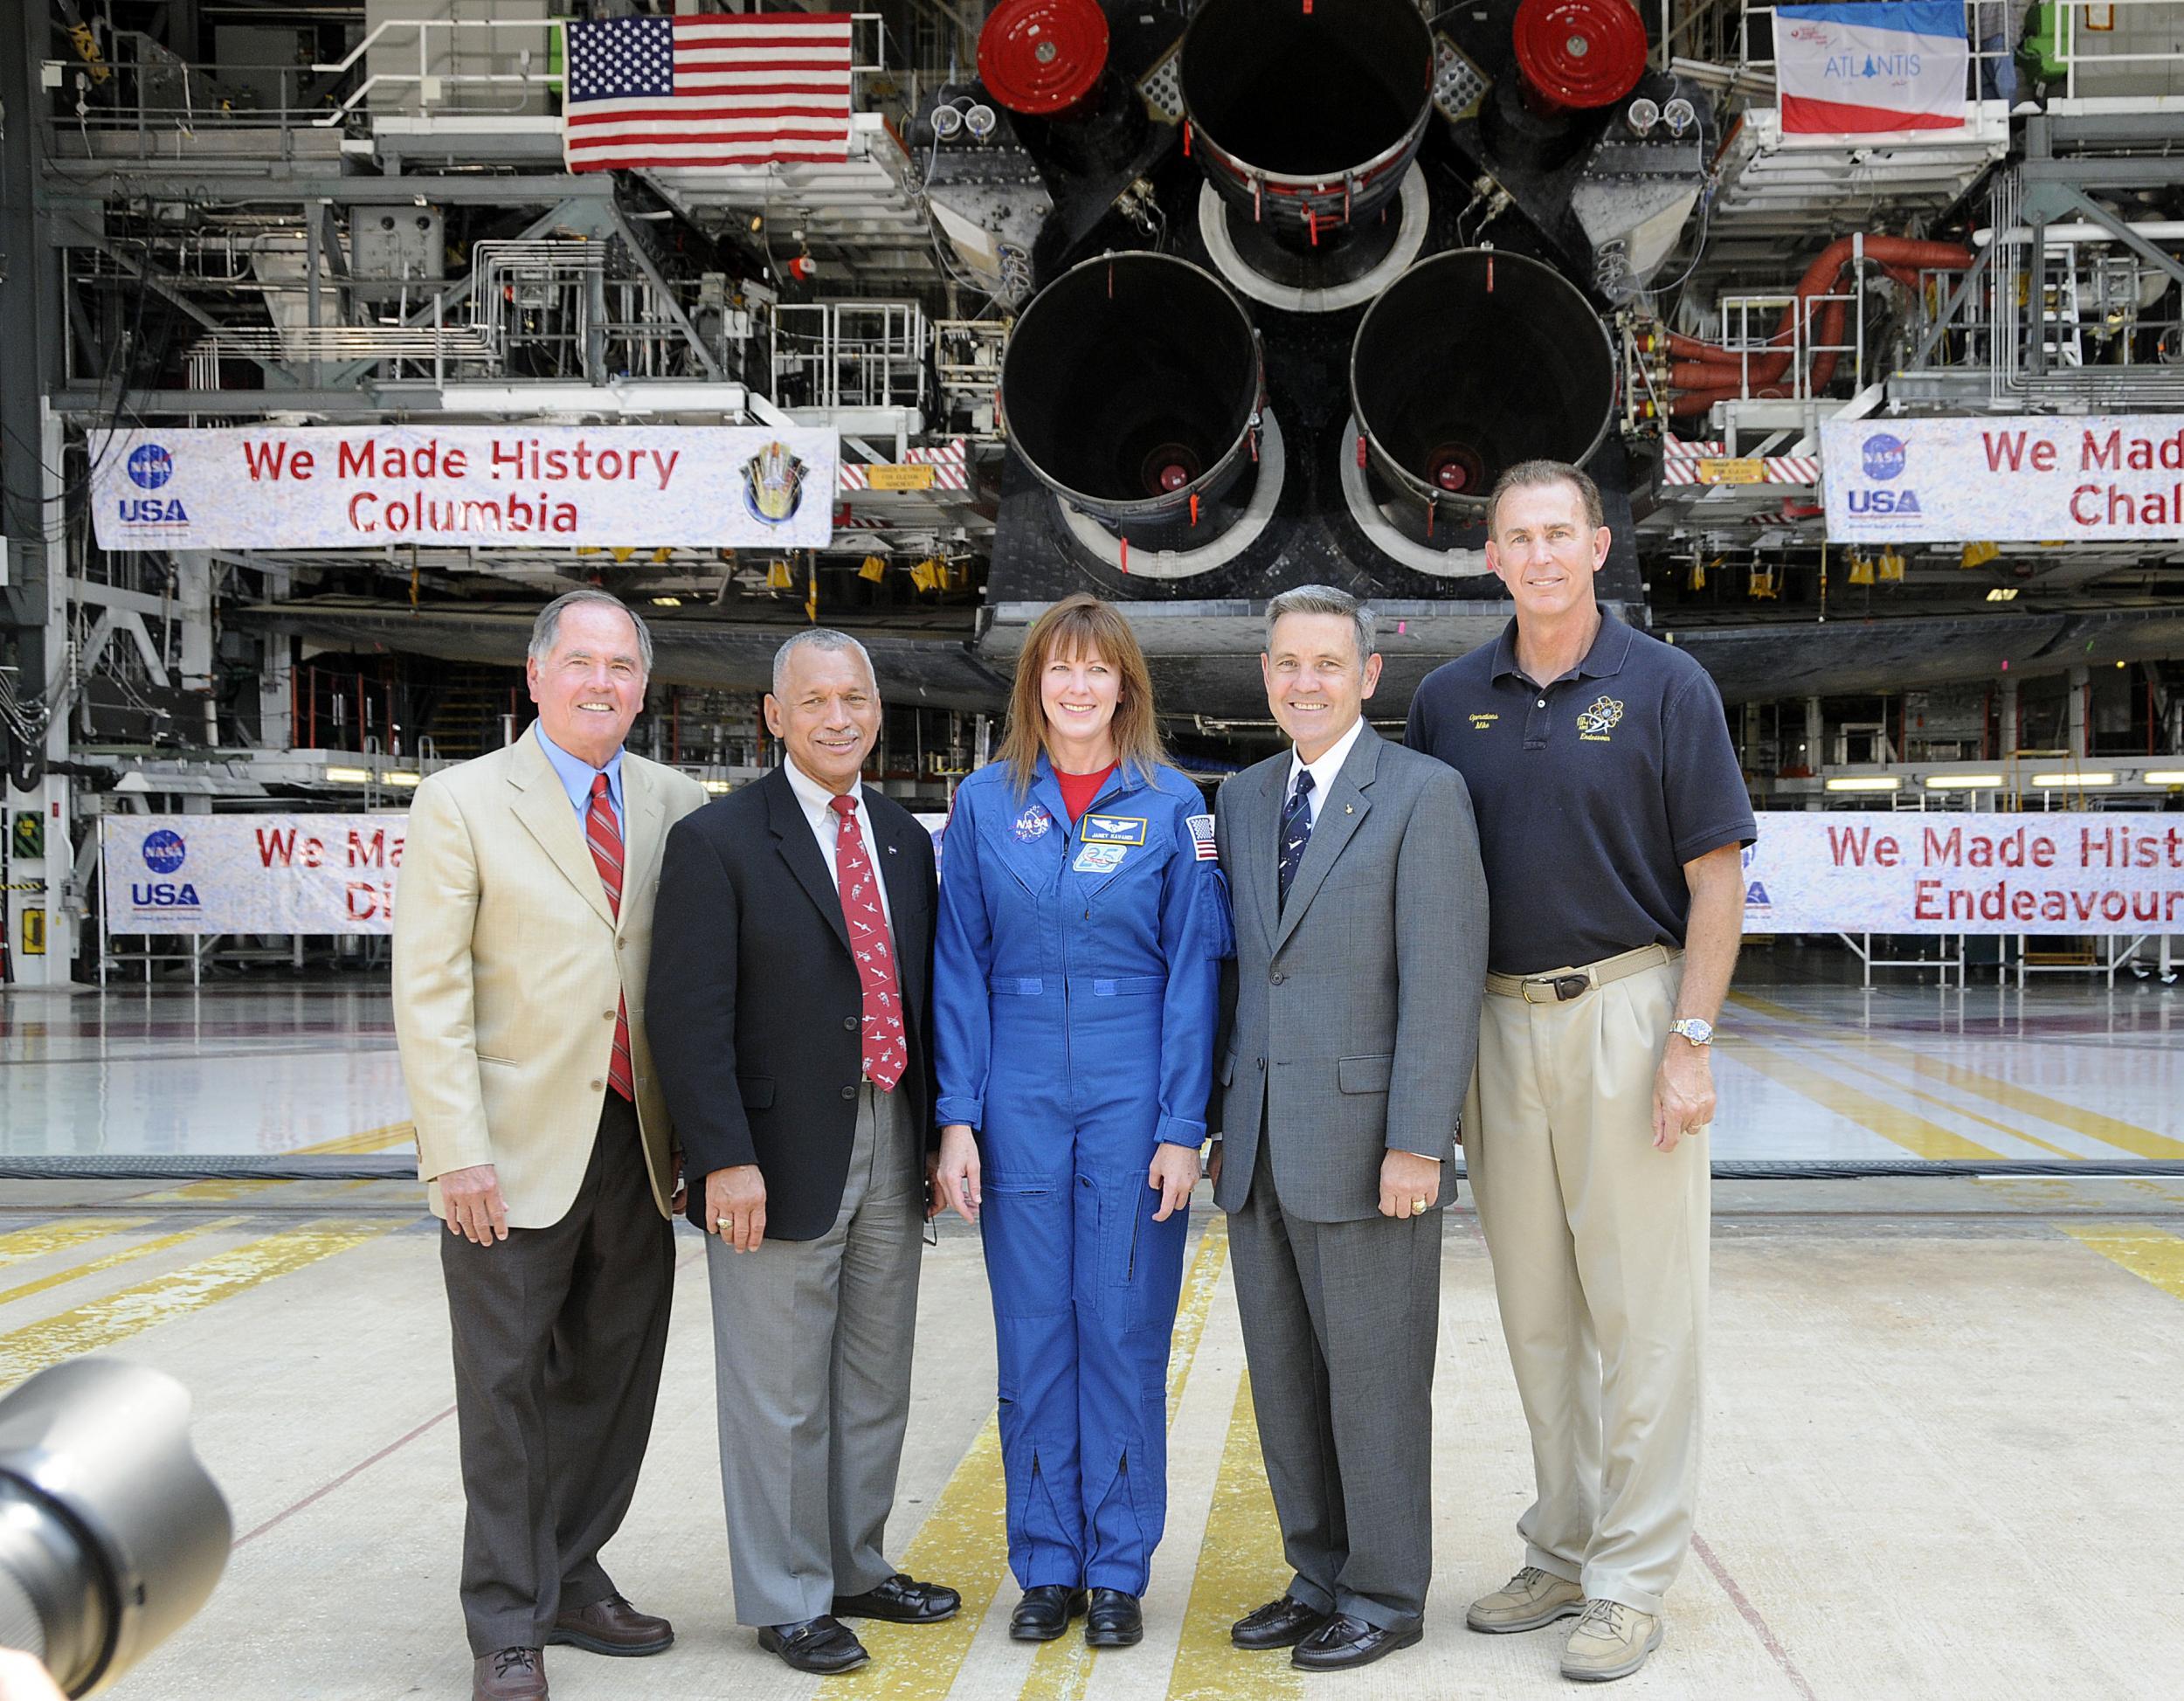 (L-R) Astronaut and pilot of first shuttle launch Bob Crippen, Nasa administrator Charles Bolden, Janet Kavandi, KSC director Bob Cabana and vehicle manager Mike Parrish in 2011